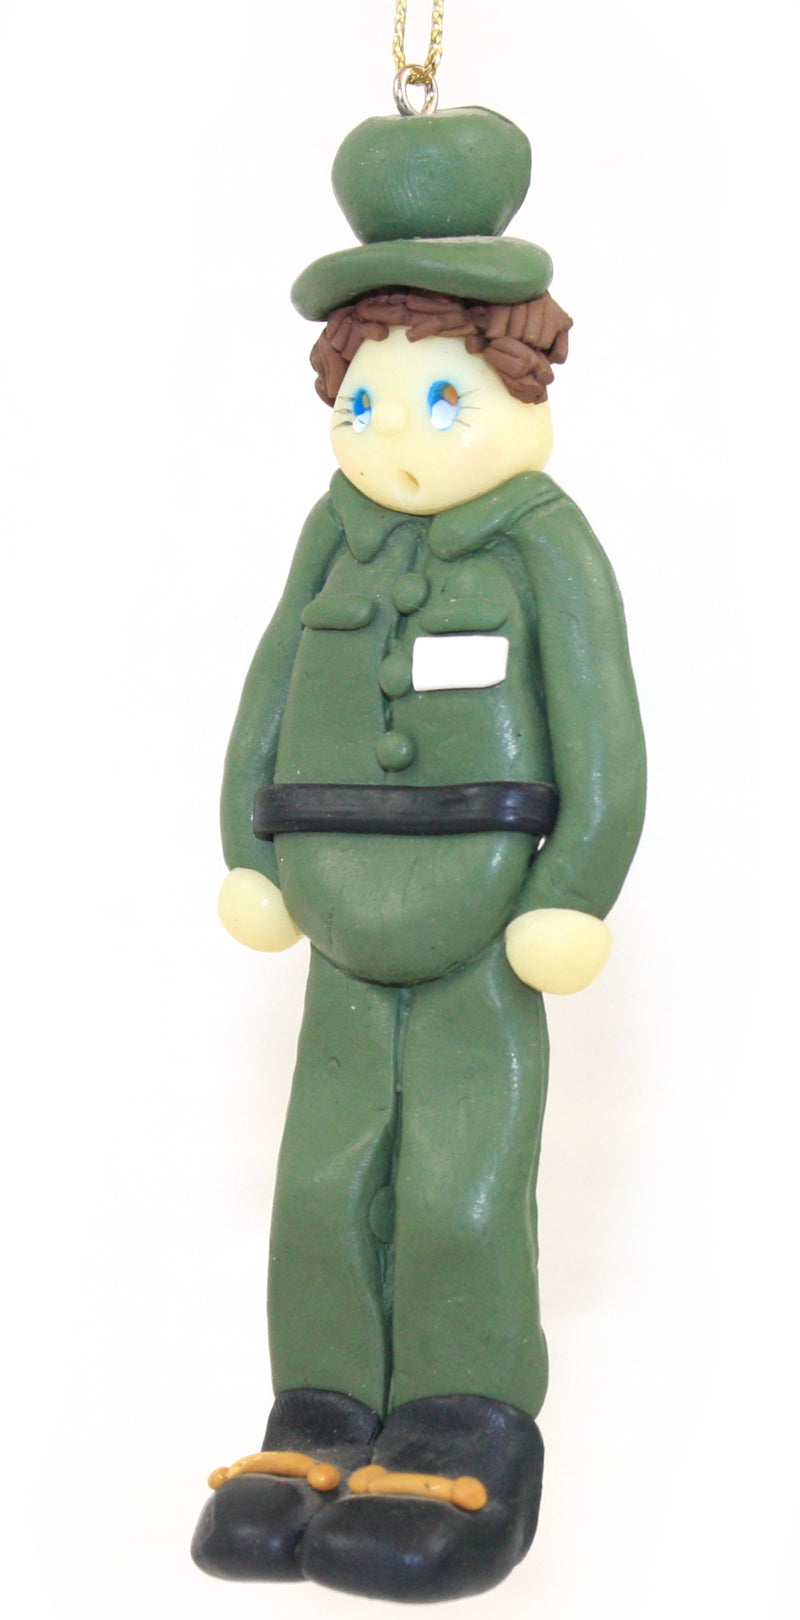 Clay Army Soldier Ornament - The Country Christmas Loft